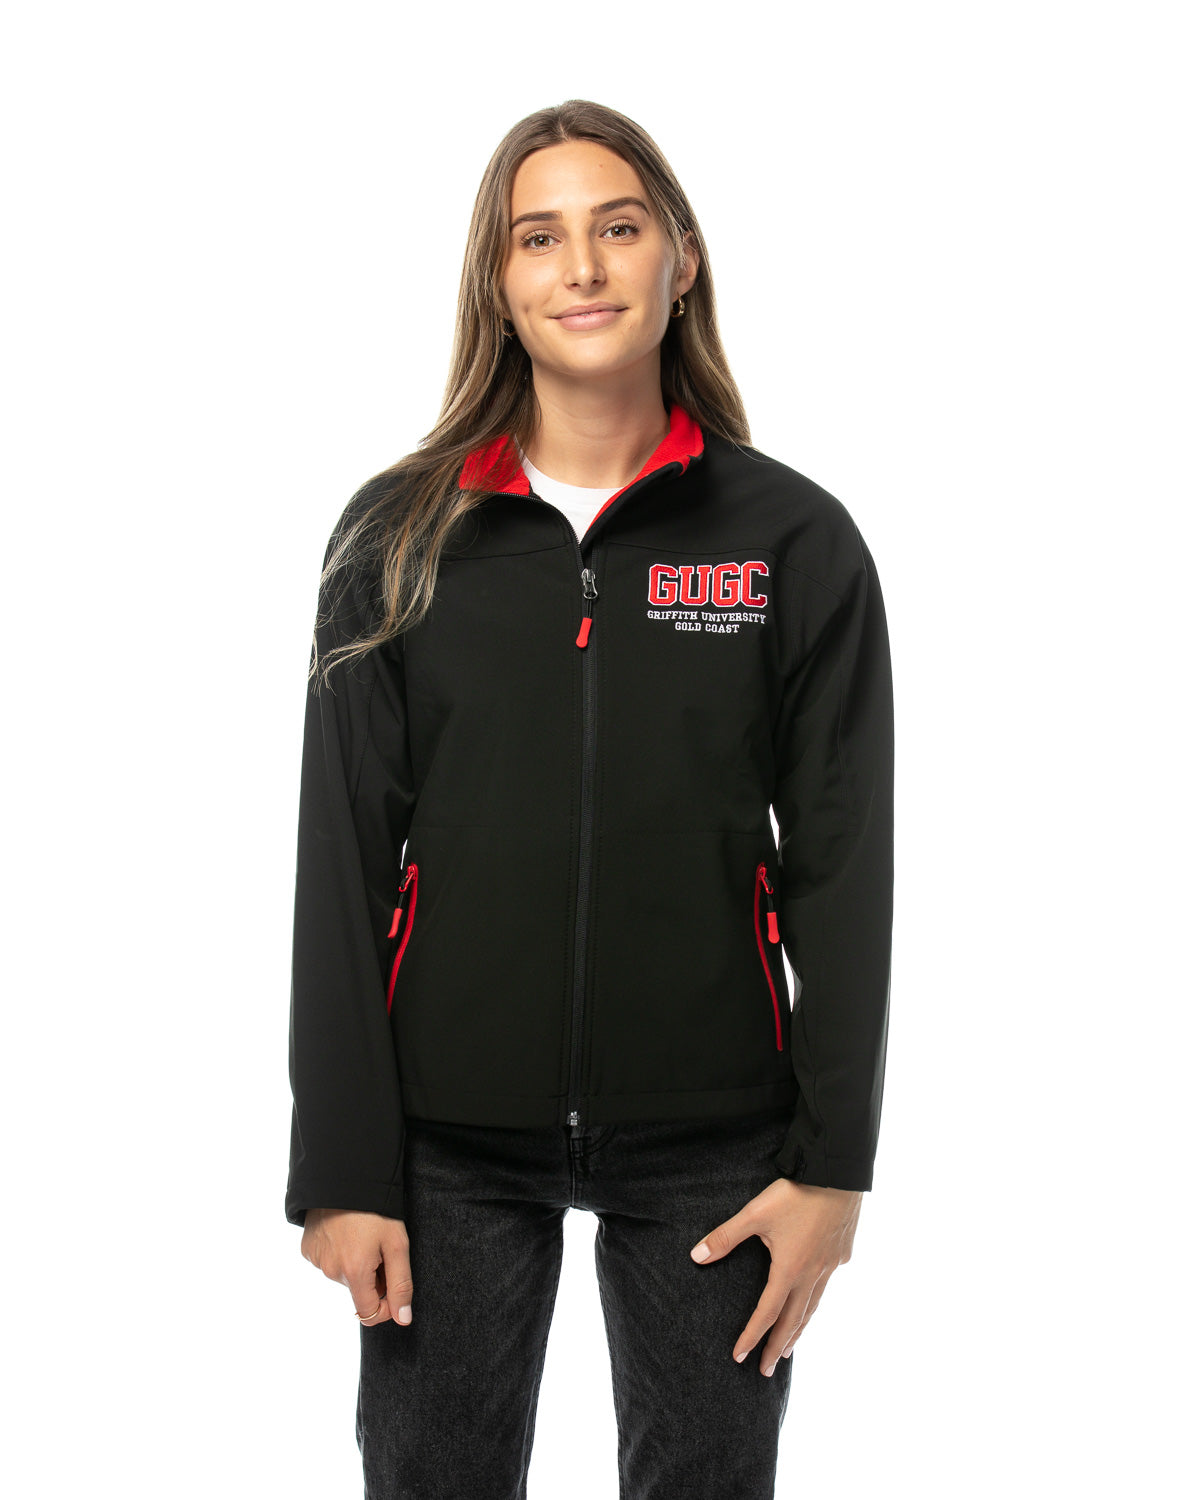 Women's Griffith softshell jacket